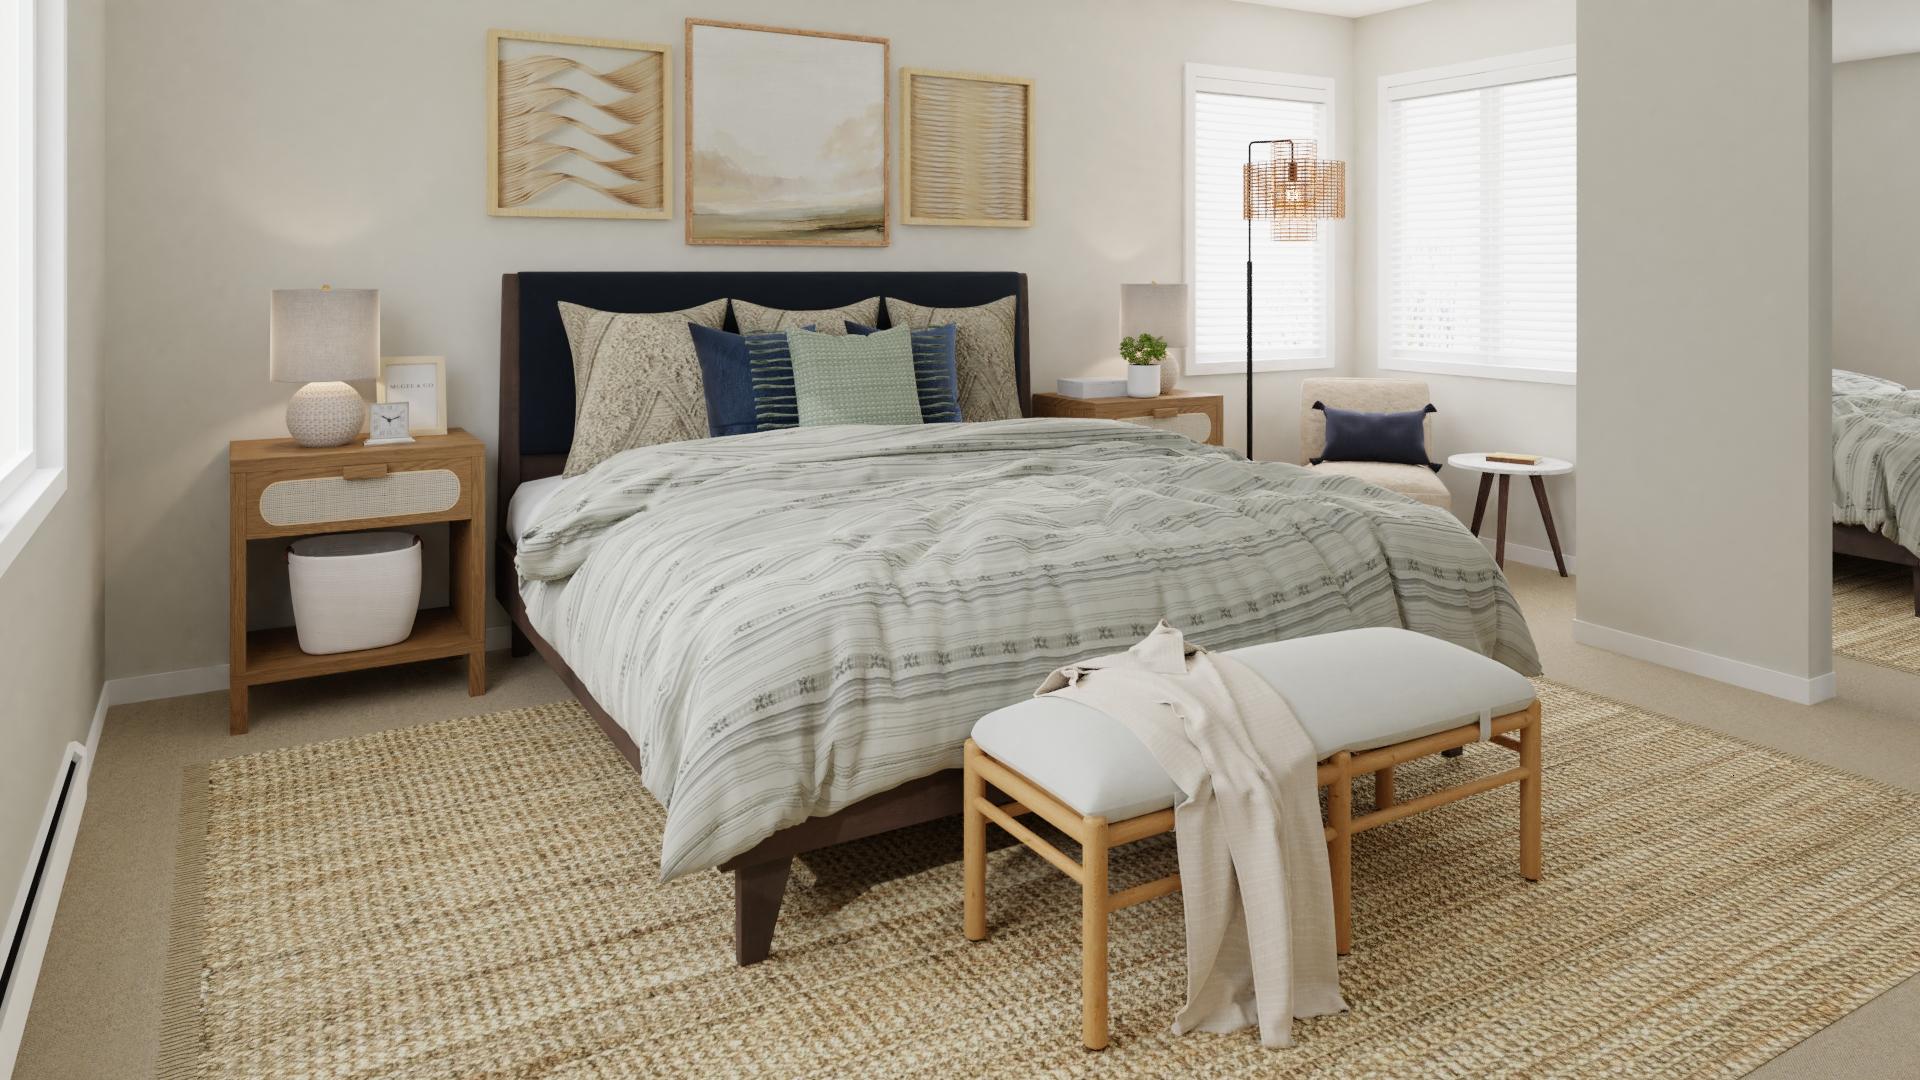 A Modern Coastal Bedroom Filled With Rattan Accents